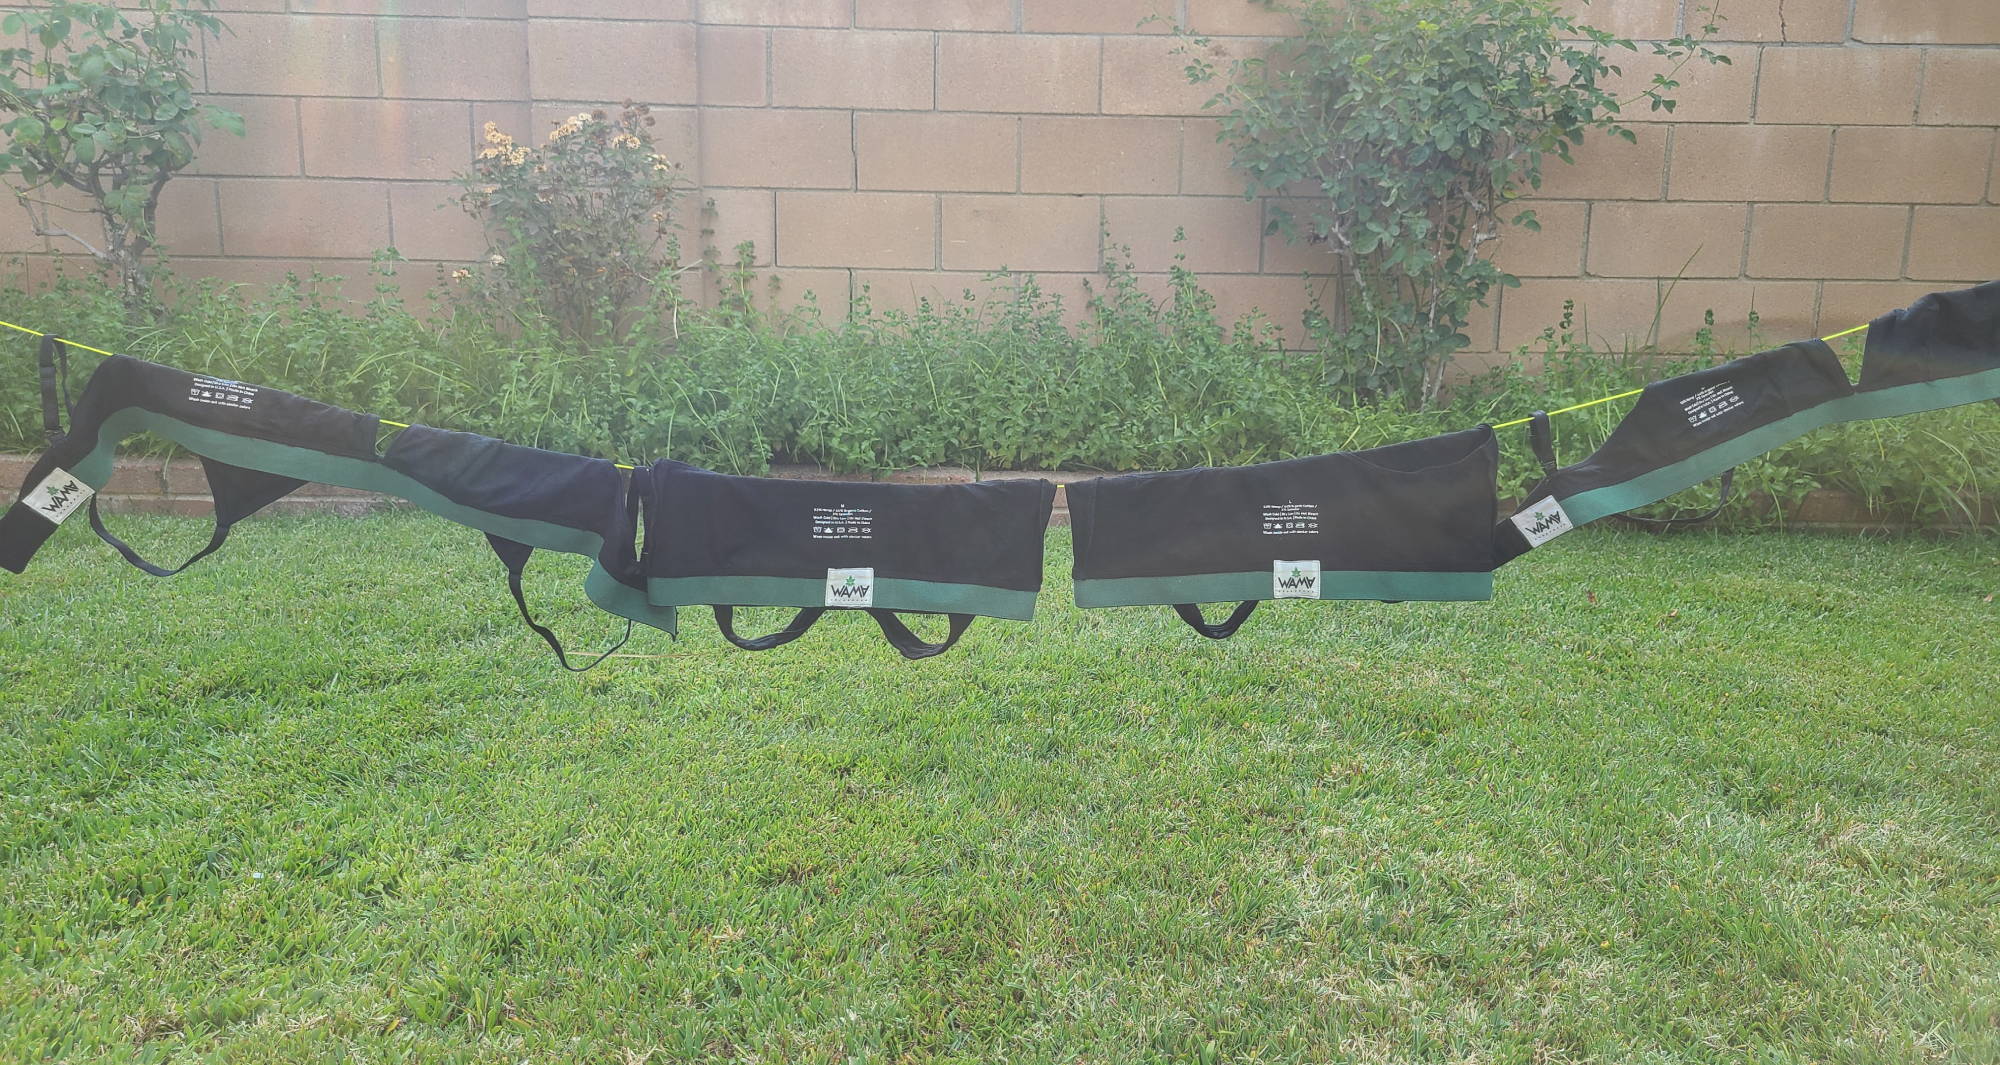  a laundry line with black bralettes hung to dry in a walled in backyard with green grass and plants